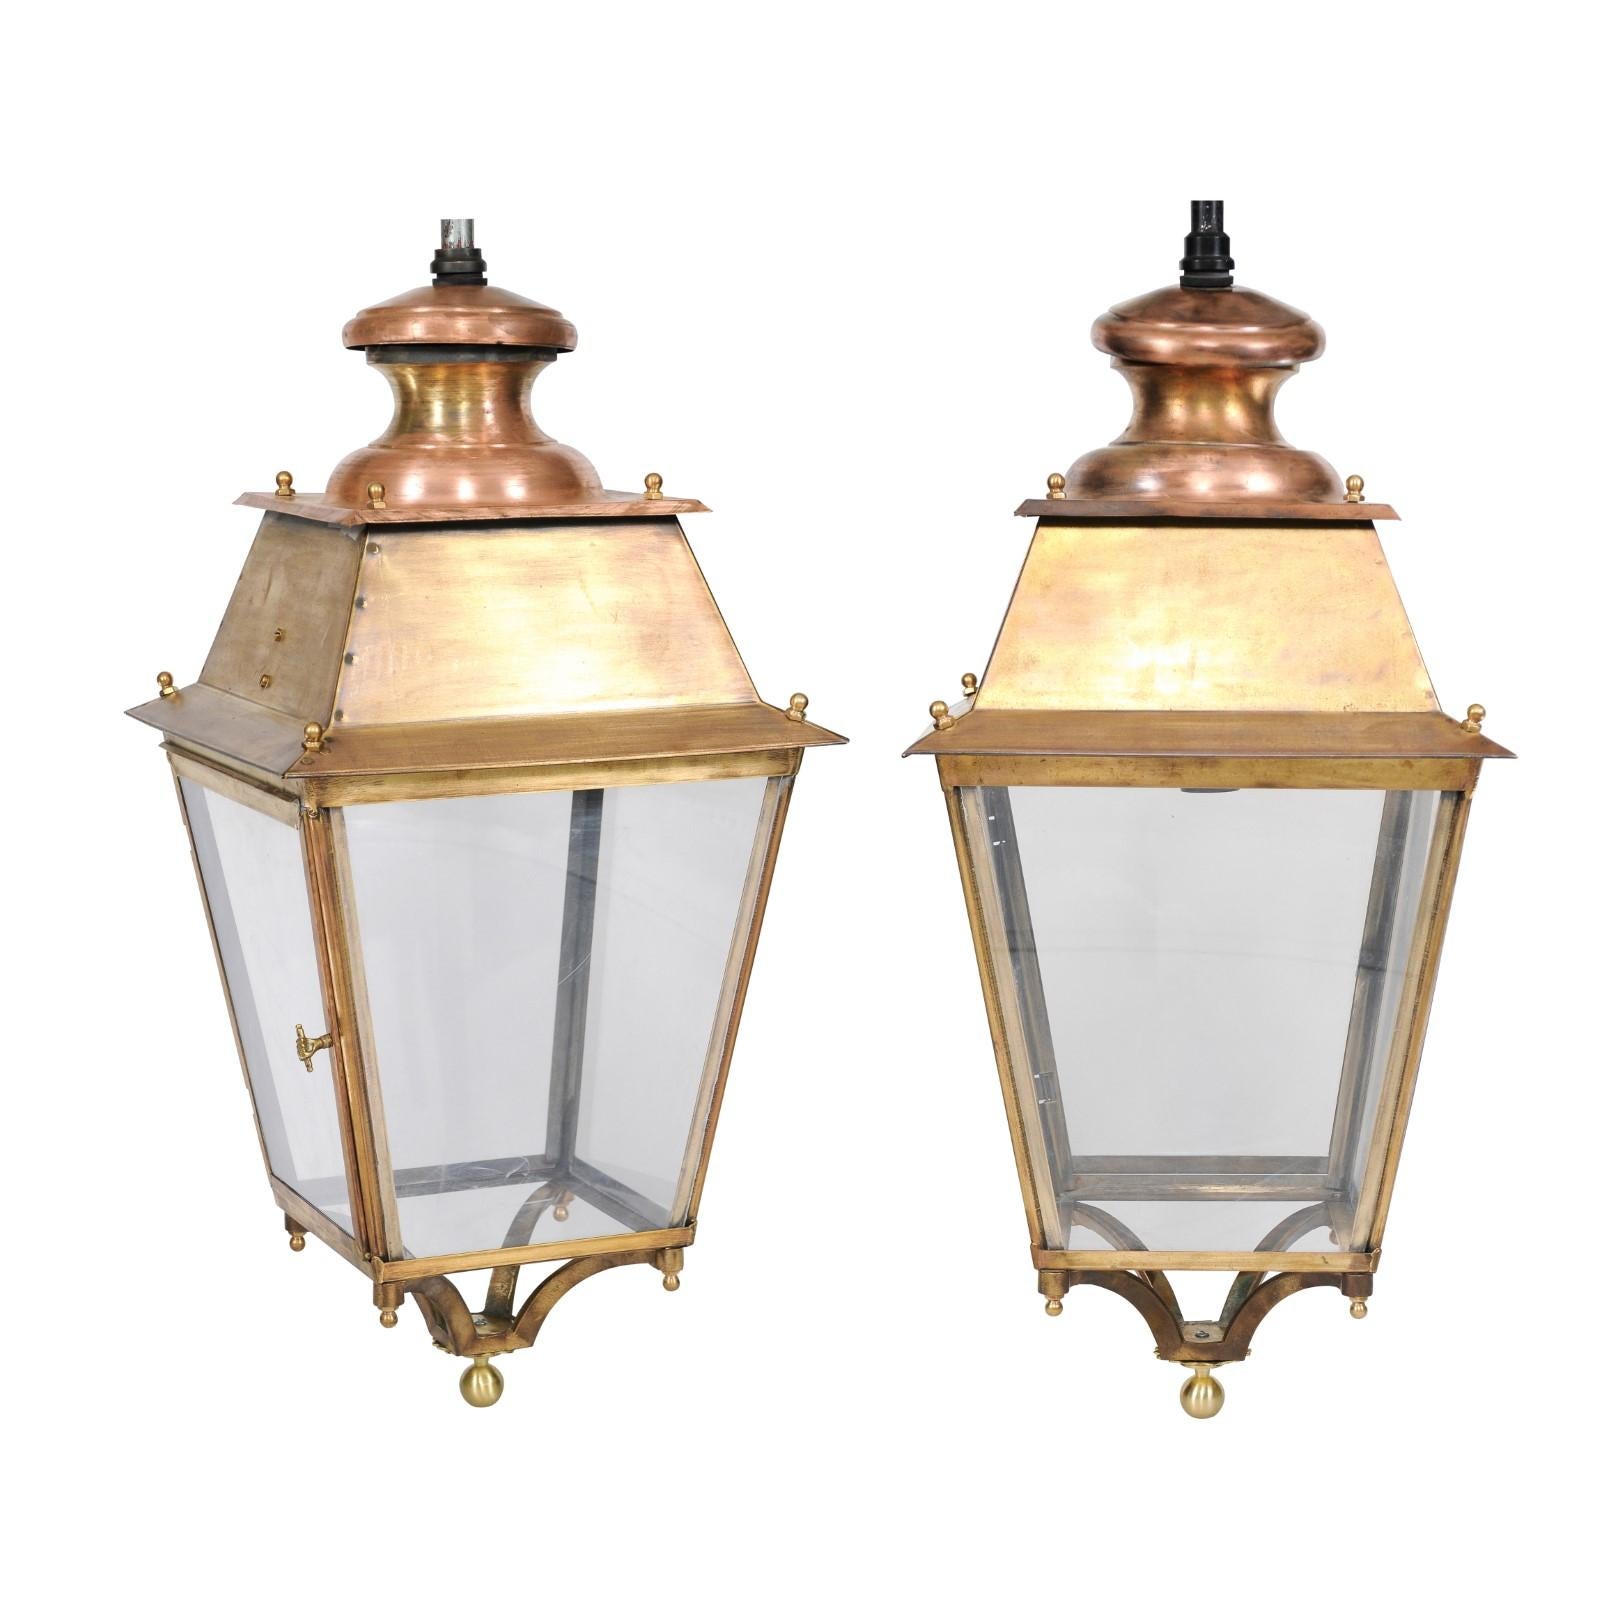 Pair of French Copper and Plexiglass Lanterns with Brass Accents from the 1920s